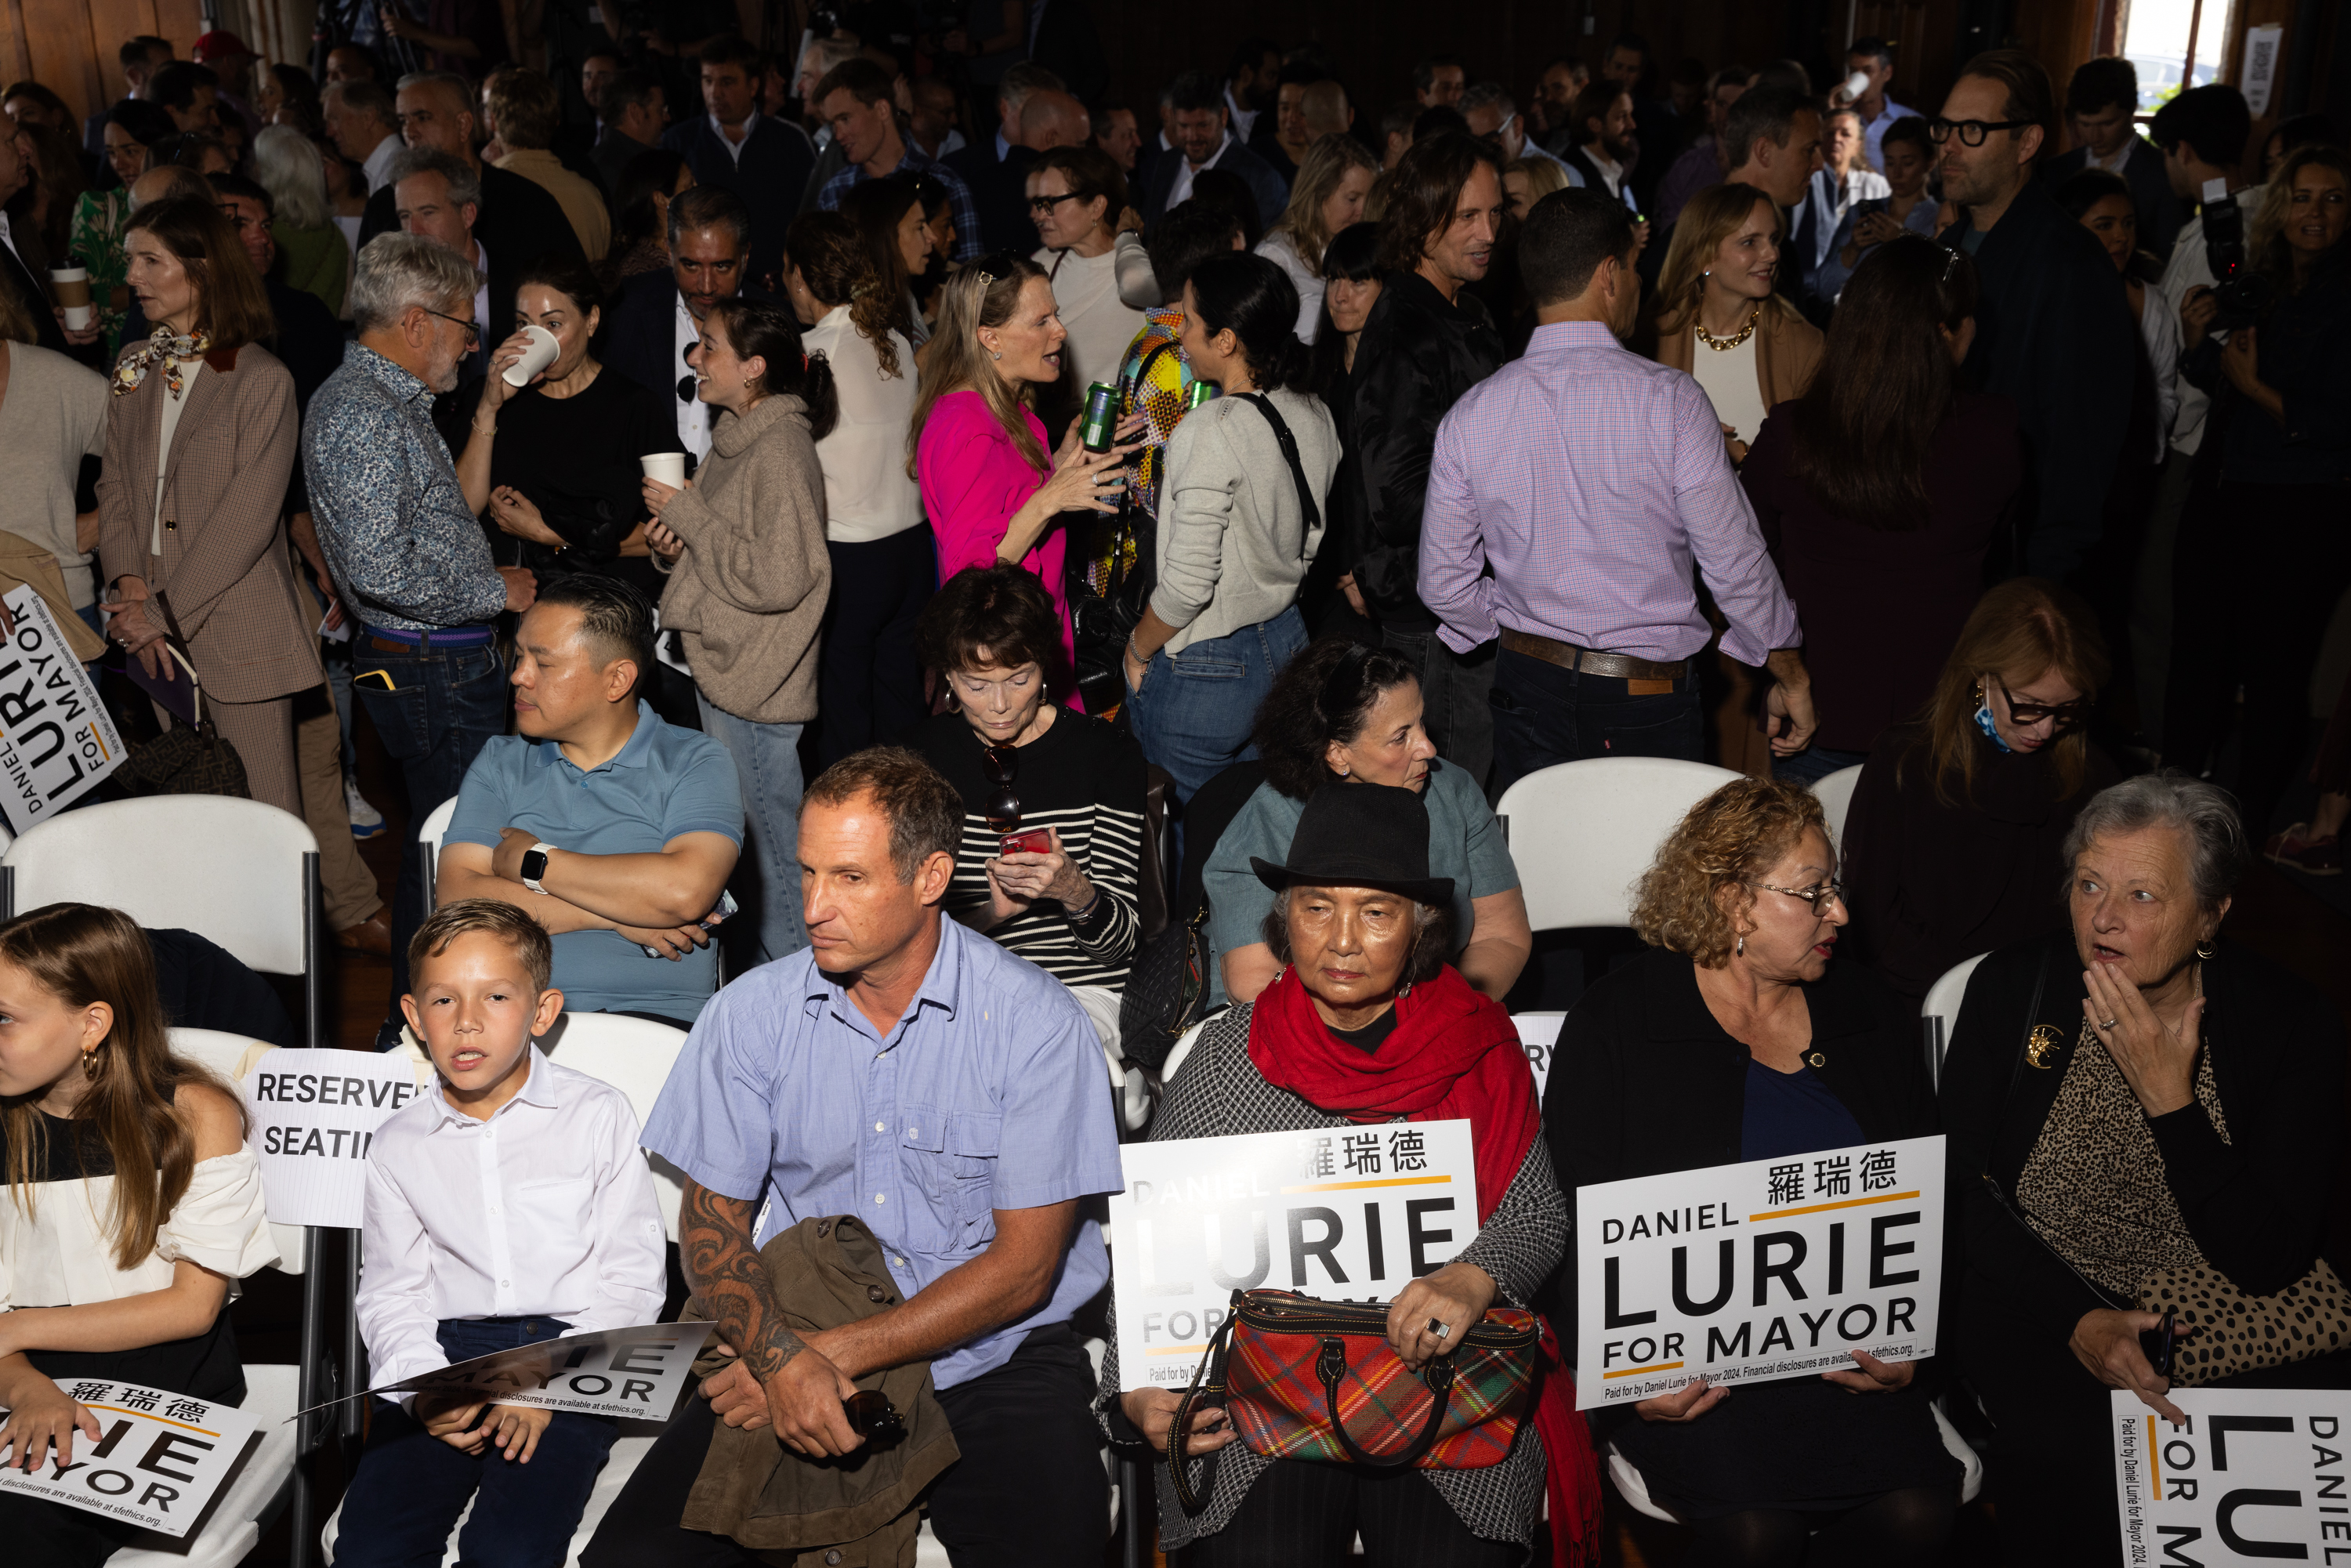 A diverse crowd holding &quot;Daniel Lurie for Mayor&quot; signs awaits an event in a packed hall.